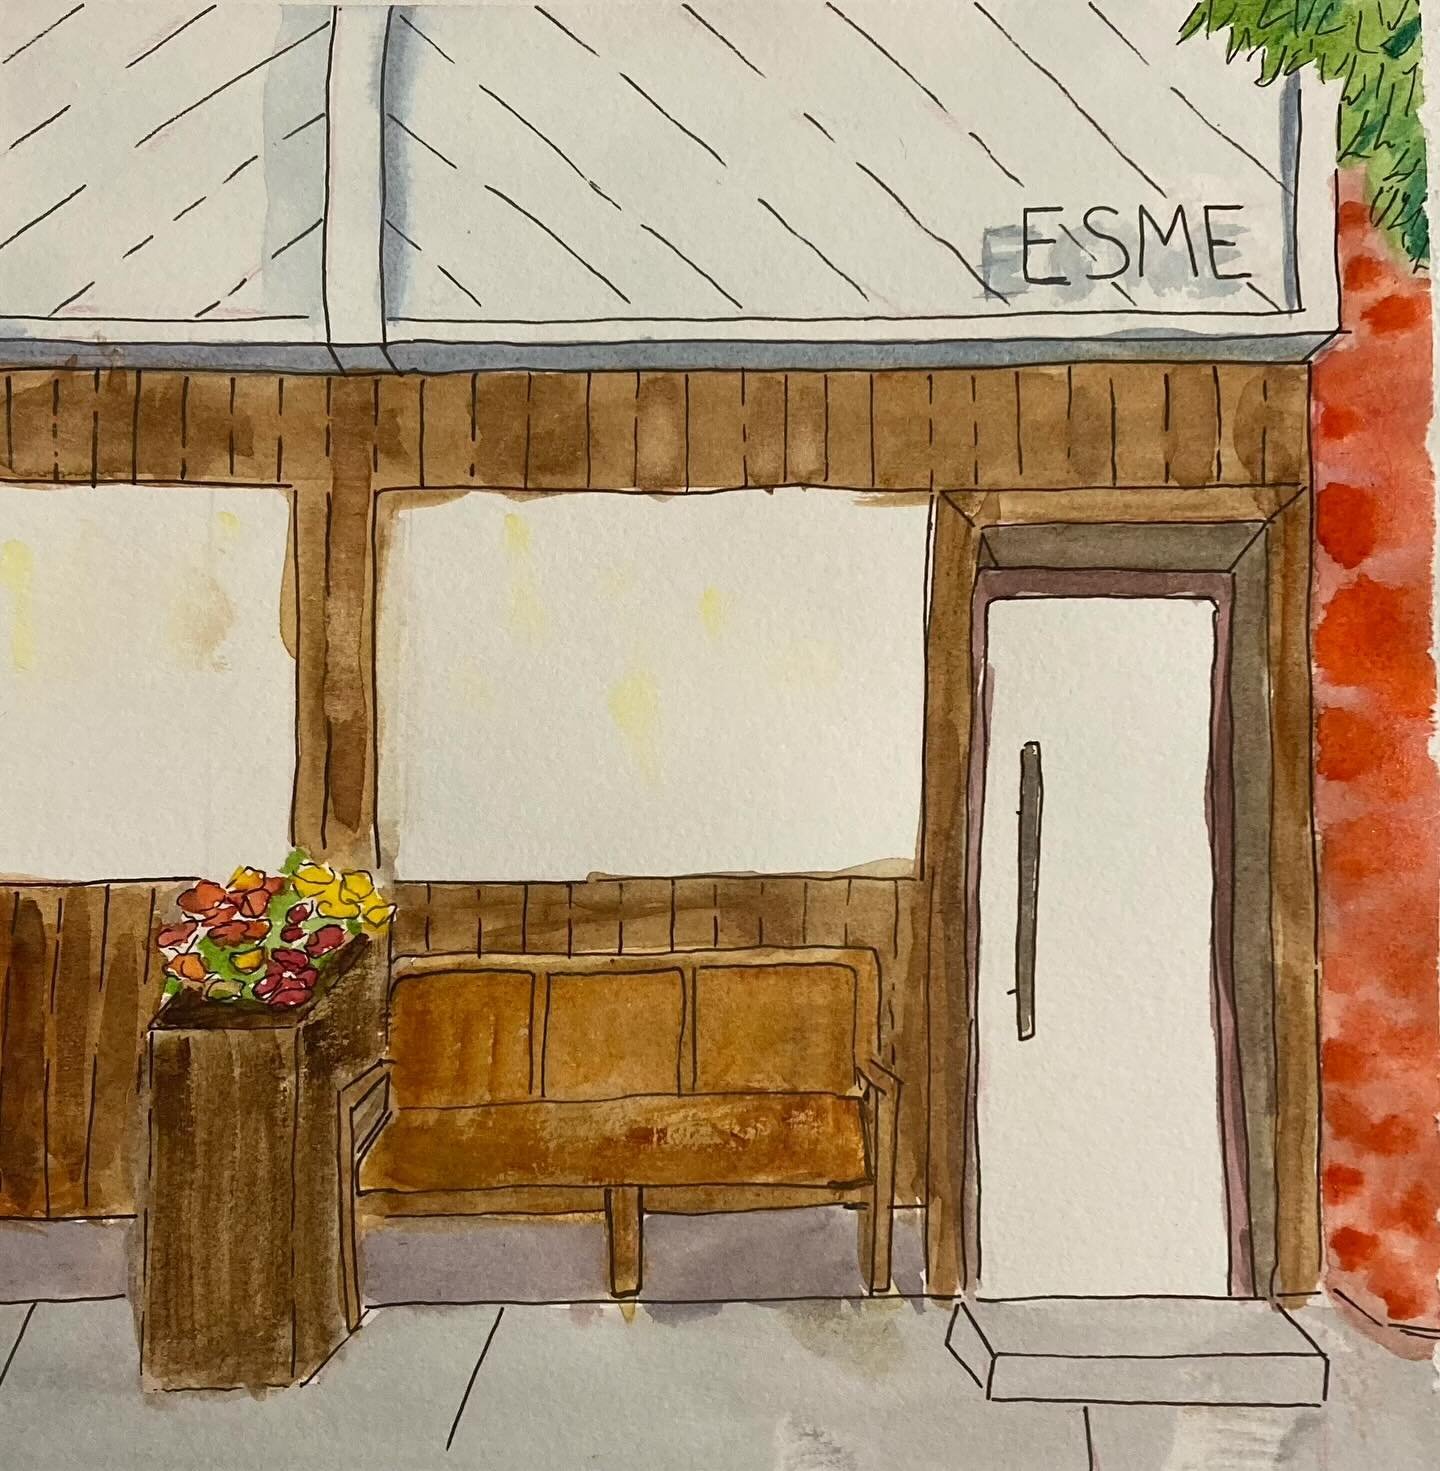 To our friends, colleagues &amp; neighbors&ndash;

10 years ago we opened Esme with the wild idea that a group of friends (and first time restaurateurs) might be able to create a space where we could gather with neighbors to break bread and build a c